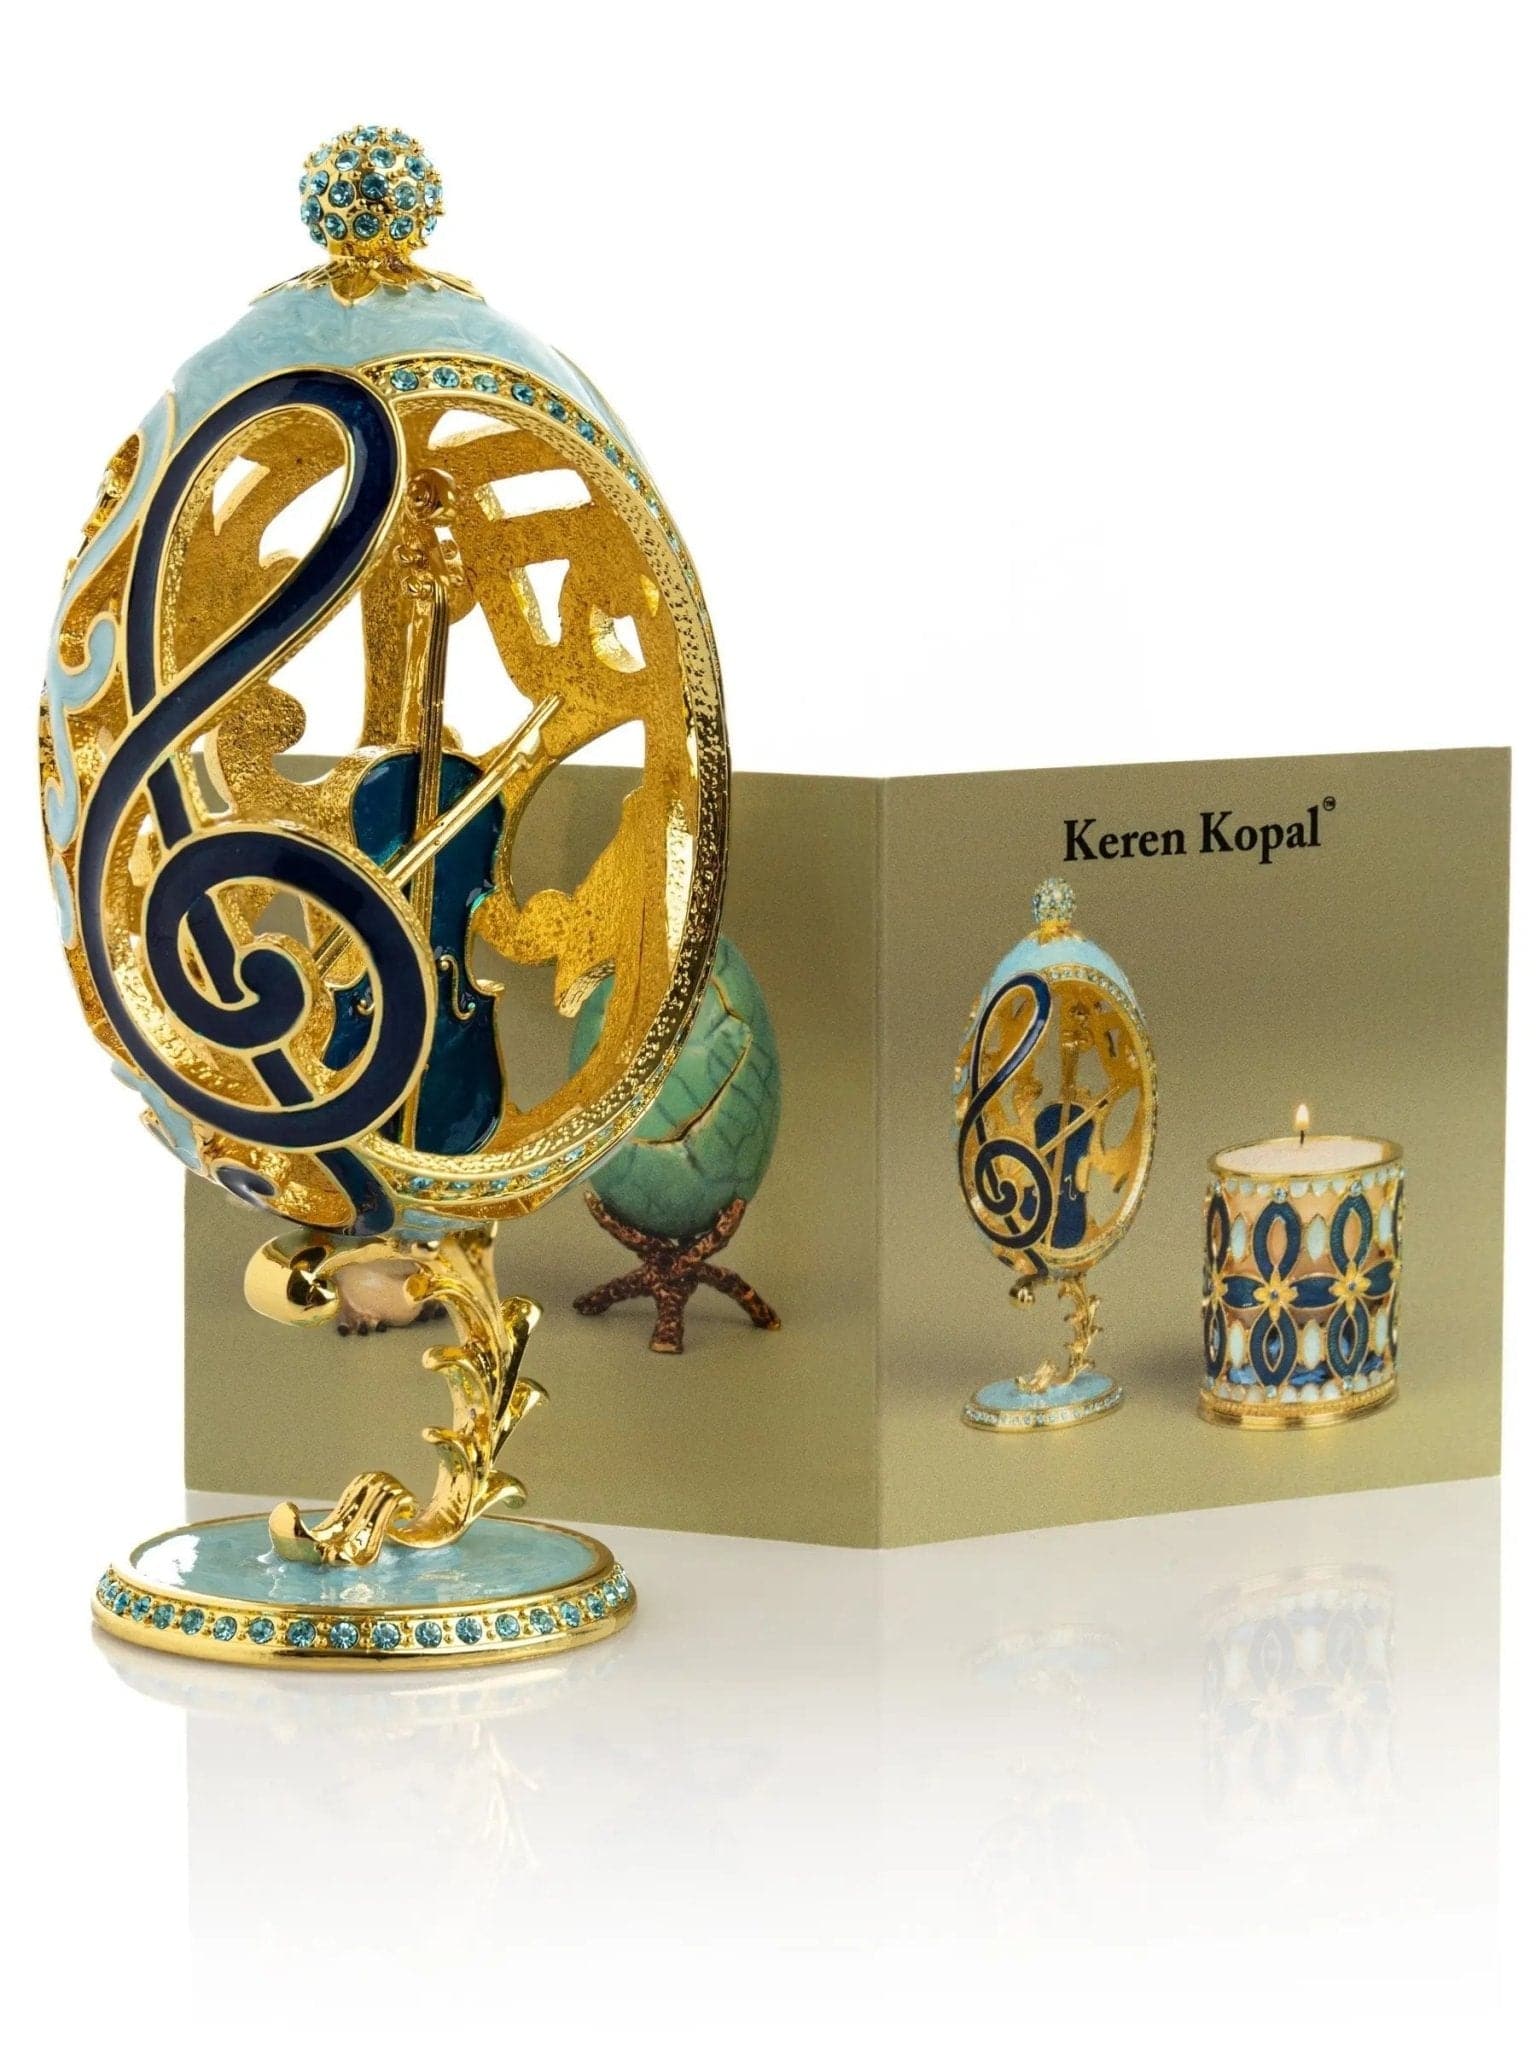 Treble Clef Faberge Egg with Violin Surprise - Treasures of my HeART